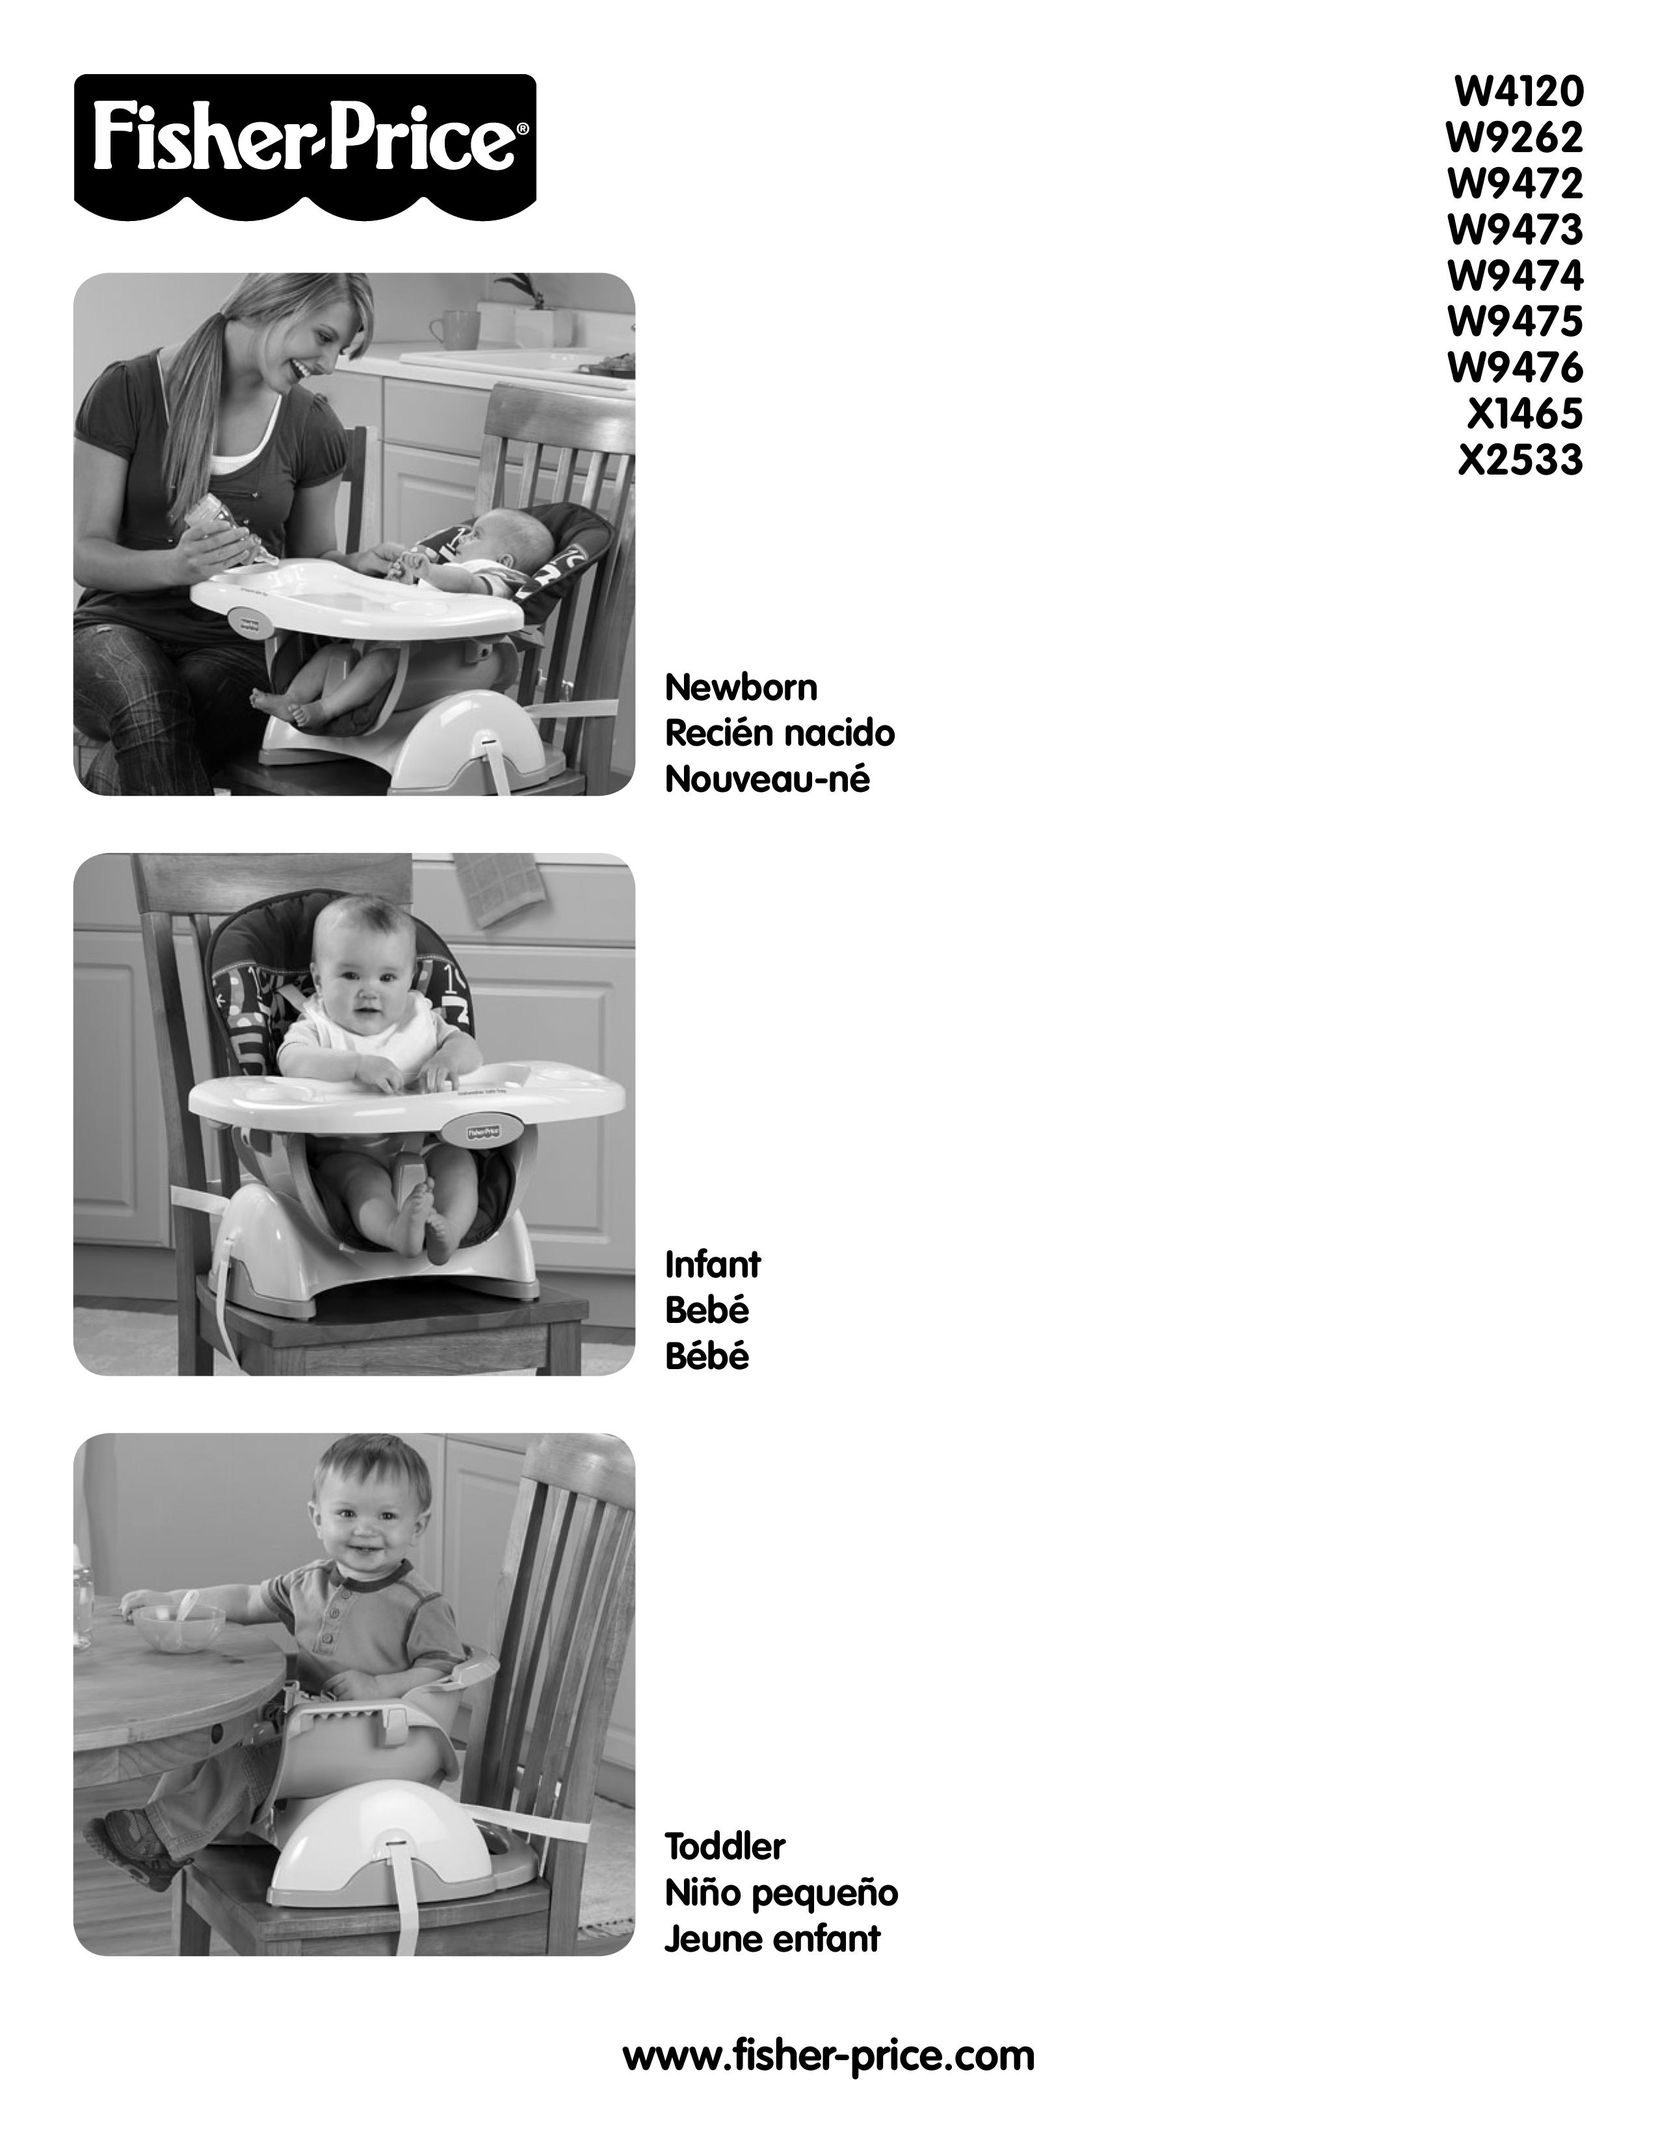 Fisher-Price W9476 High Chair User Manual